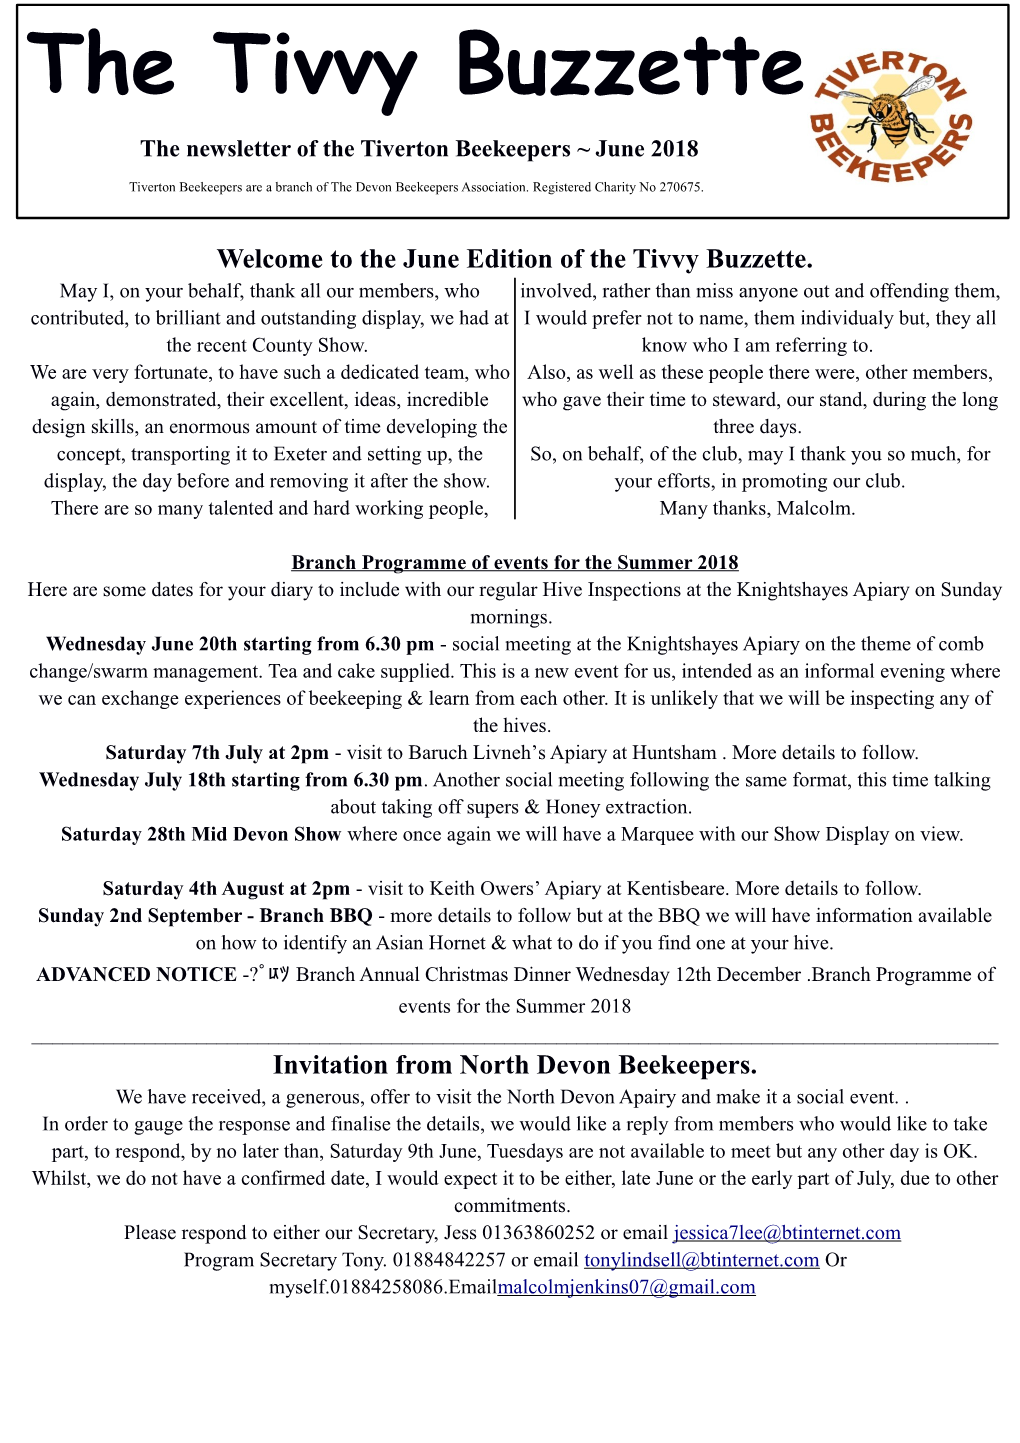 The Tivvy Buzzette the Newsletter of the Tiverton Beekeepers ~ June 2018 Tiverton Beekeepers Are a Branch of the Devon Beekeepers Association